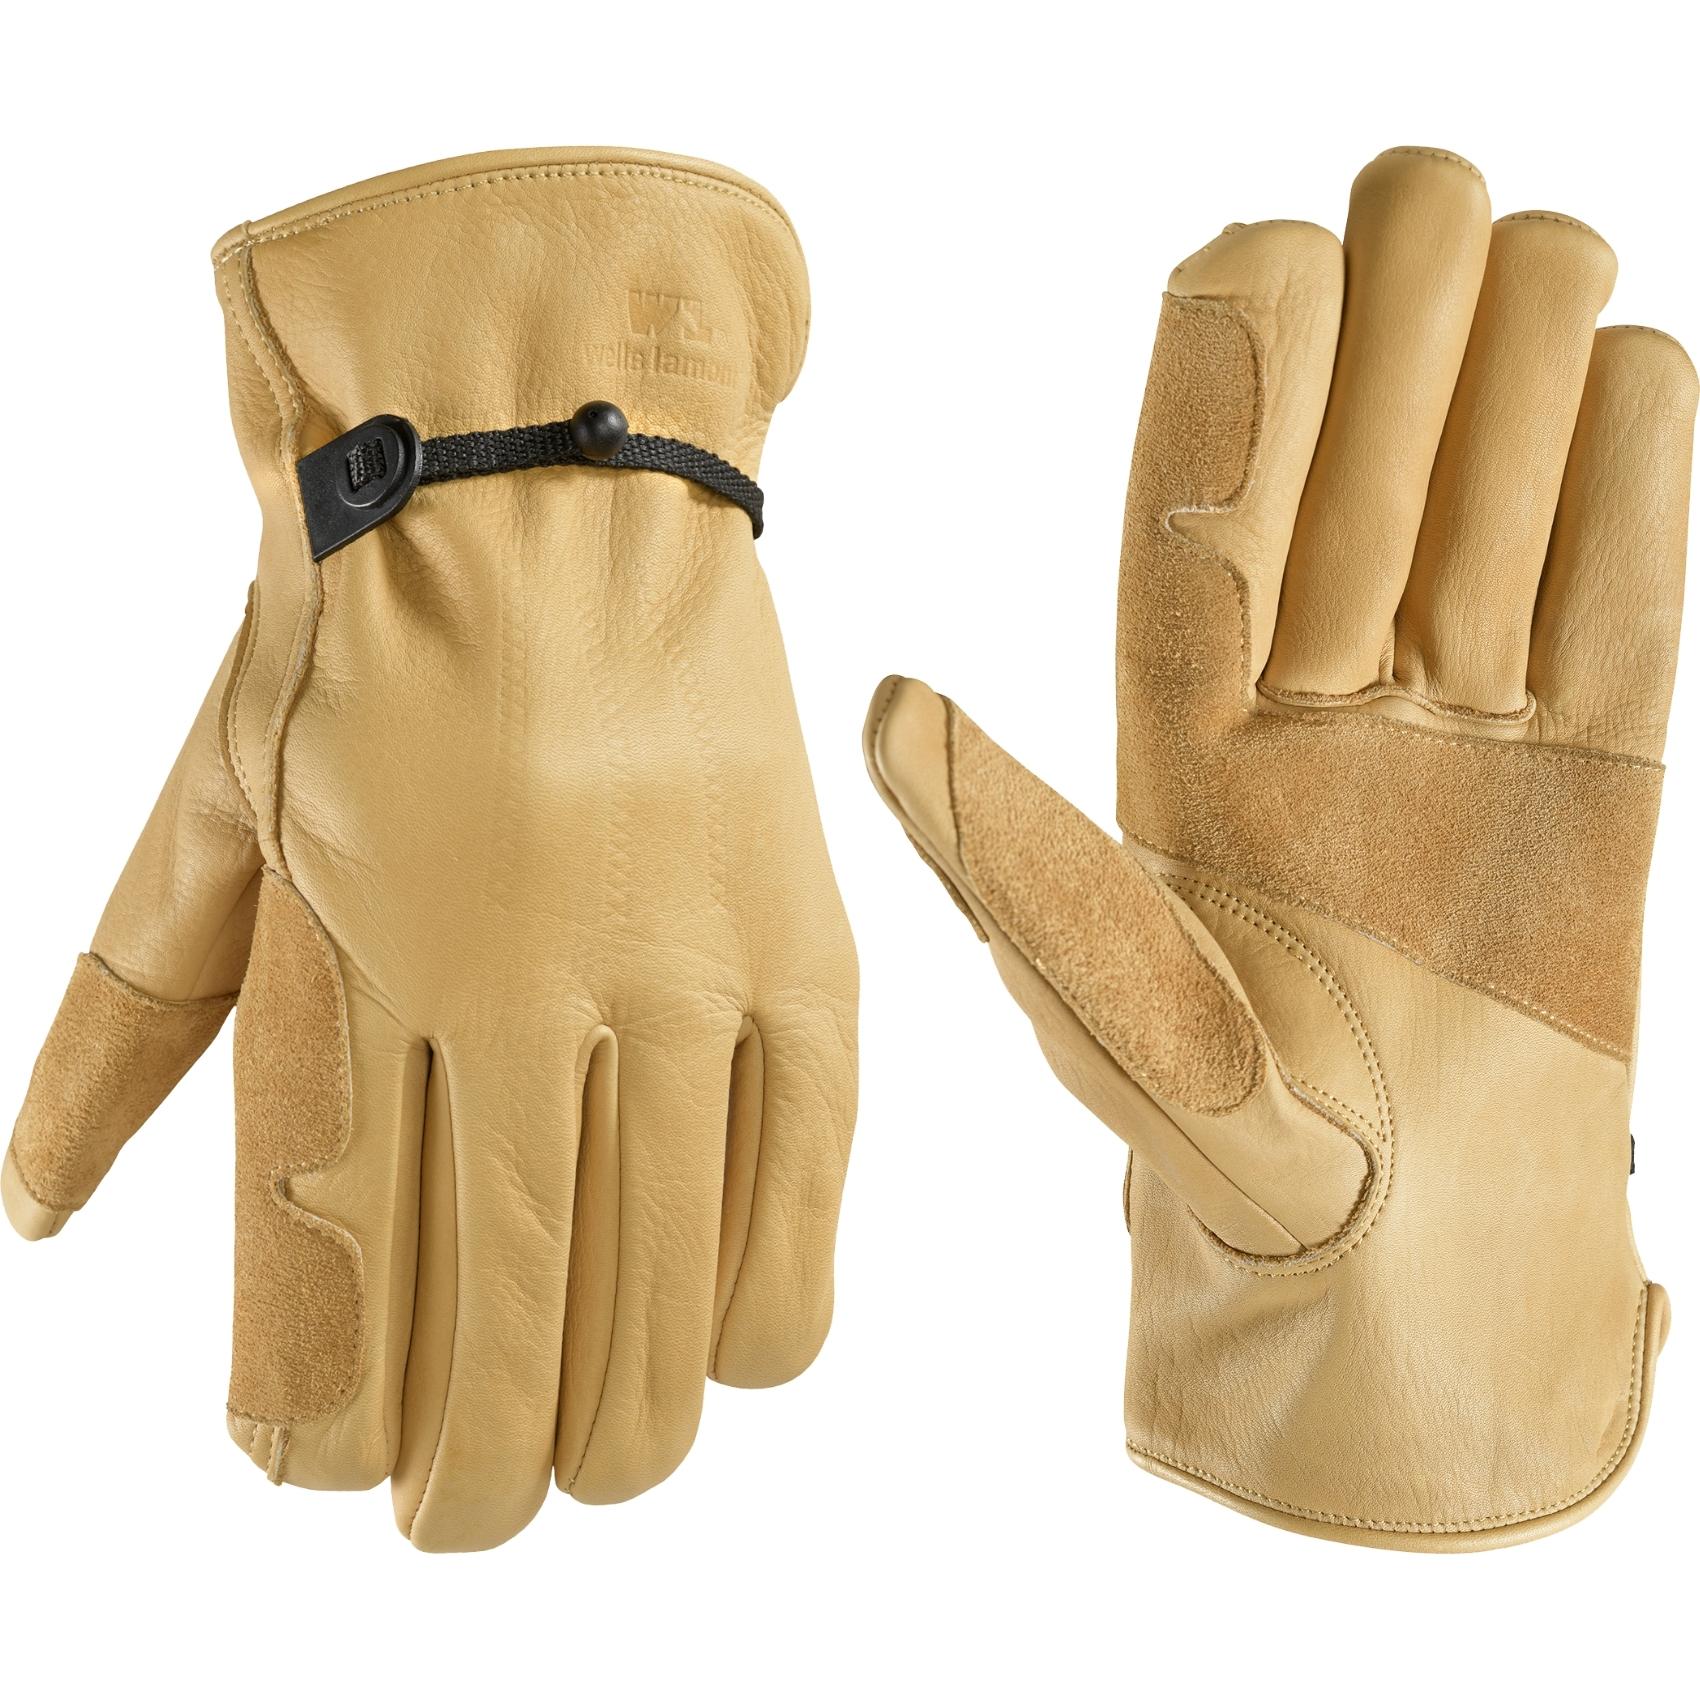 Blue Hawk Small Unisex Leather Palm Work Gloves LW84059-S